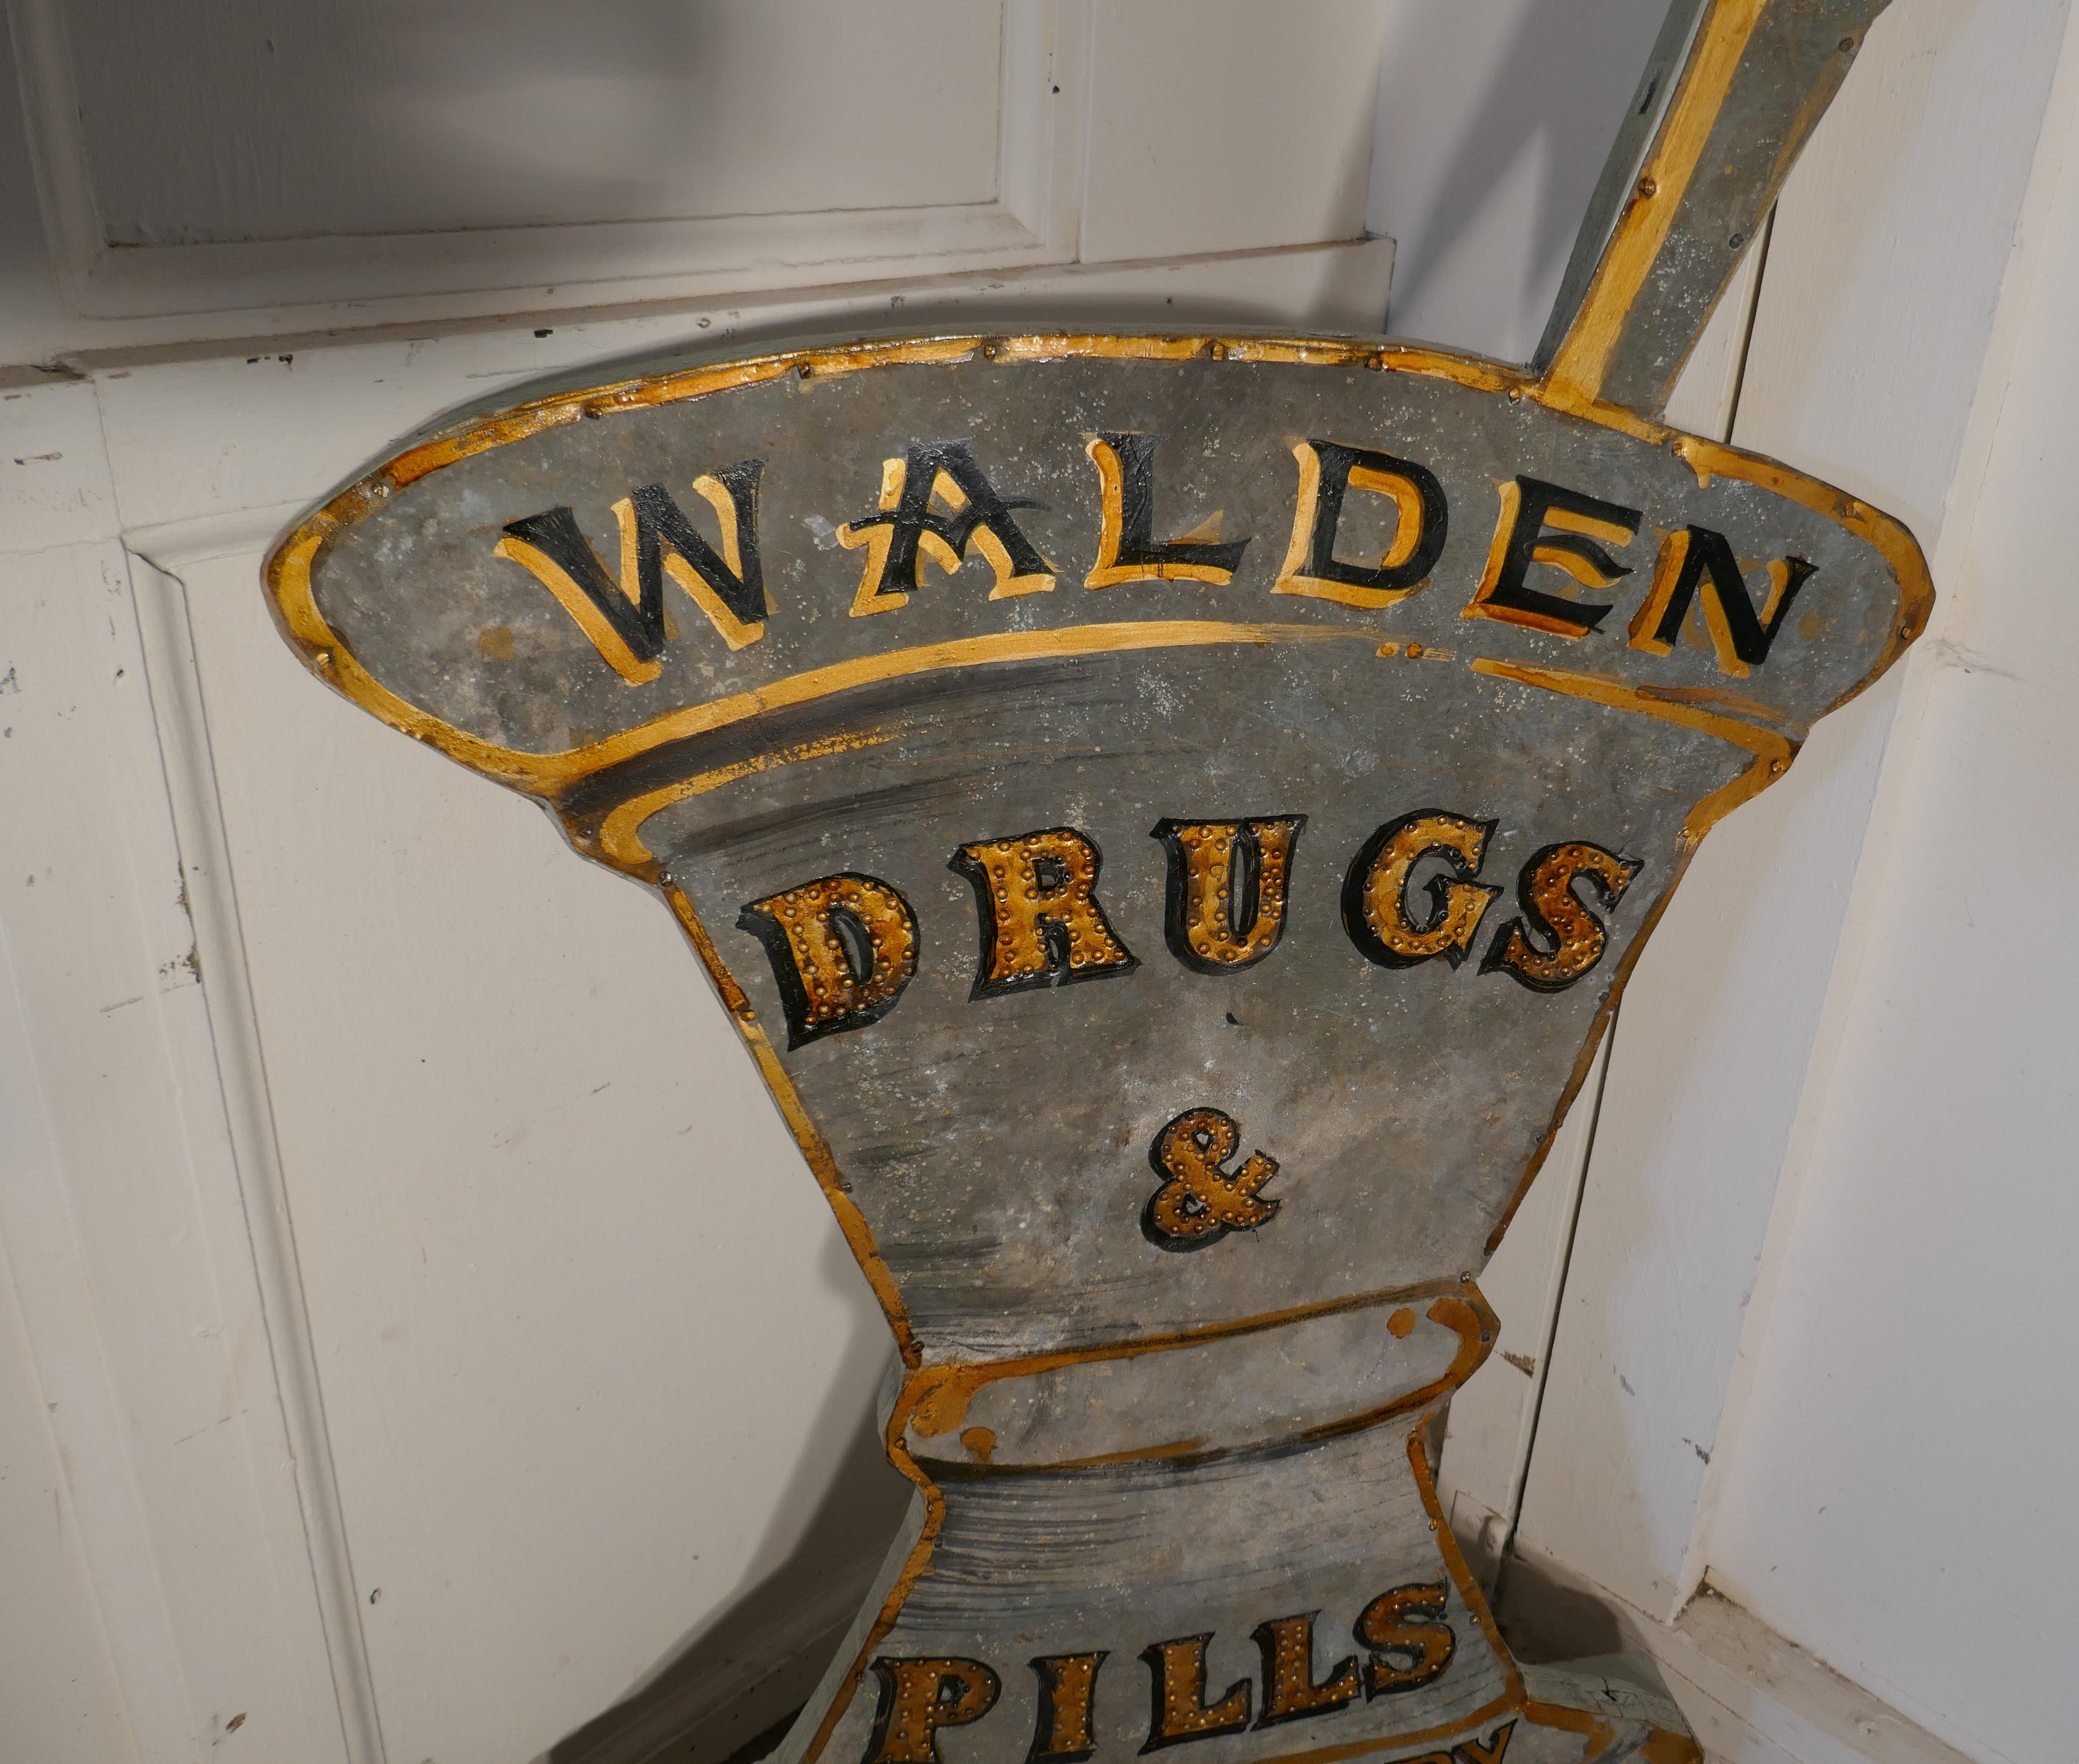 Chemist shop advertising trade sign.

A great piece, a large wooden advertising “Wall” sign, the sign is original, with studded lettering on the words “Drugs” and “Pills”, this is an original piece and in good condition. The sign is in the shape